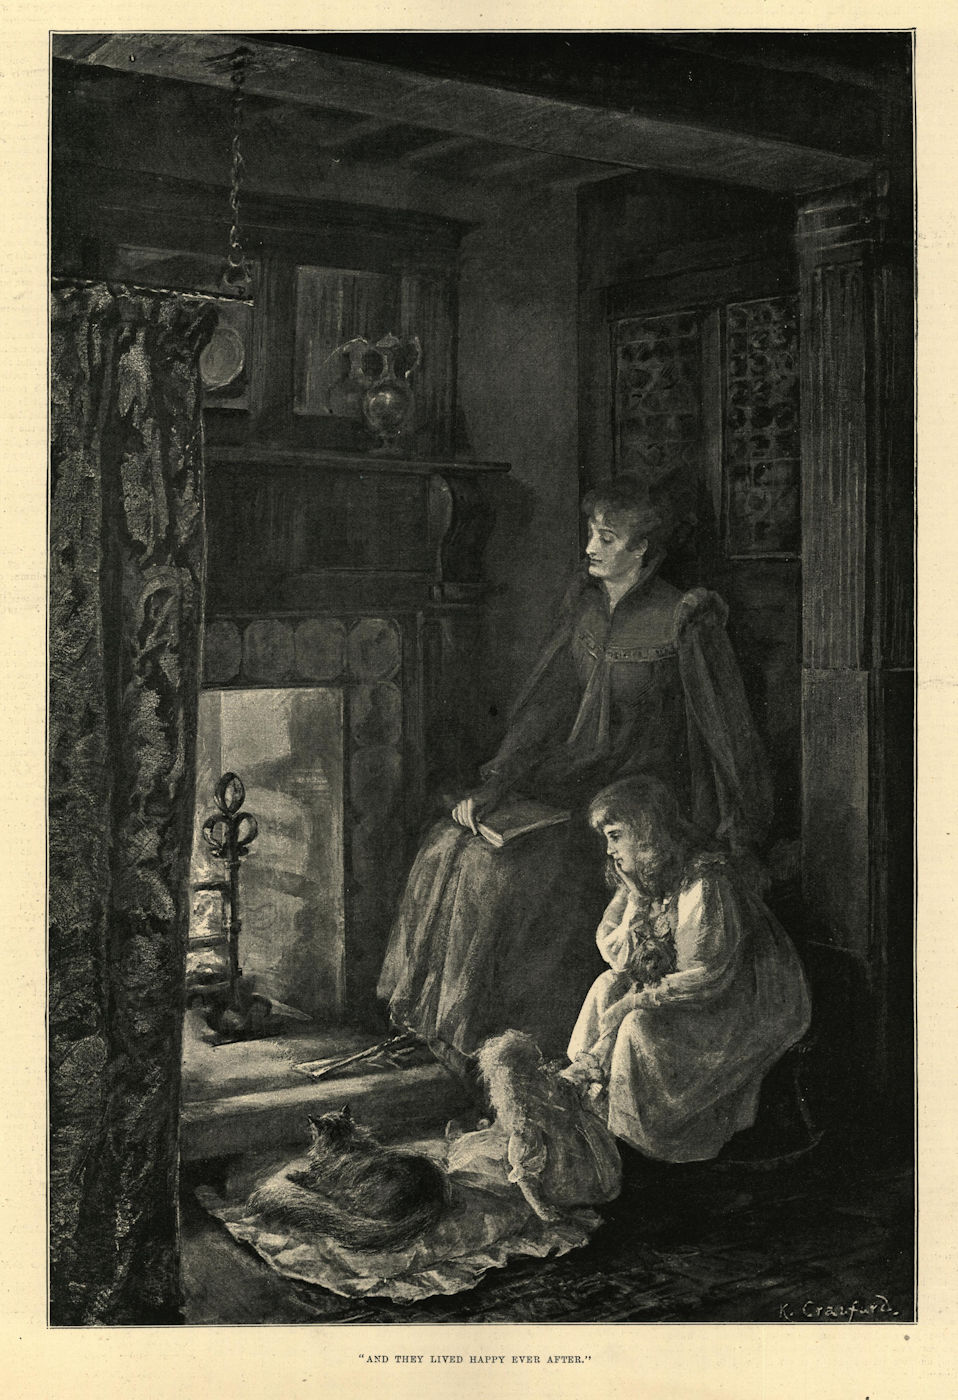 "And they lived happily ever after". Family fireplace 1892 ILN full page print